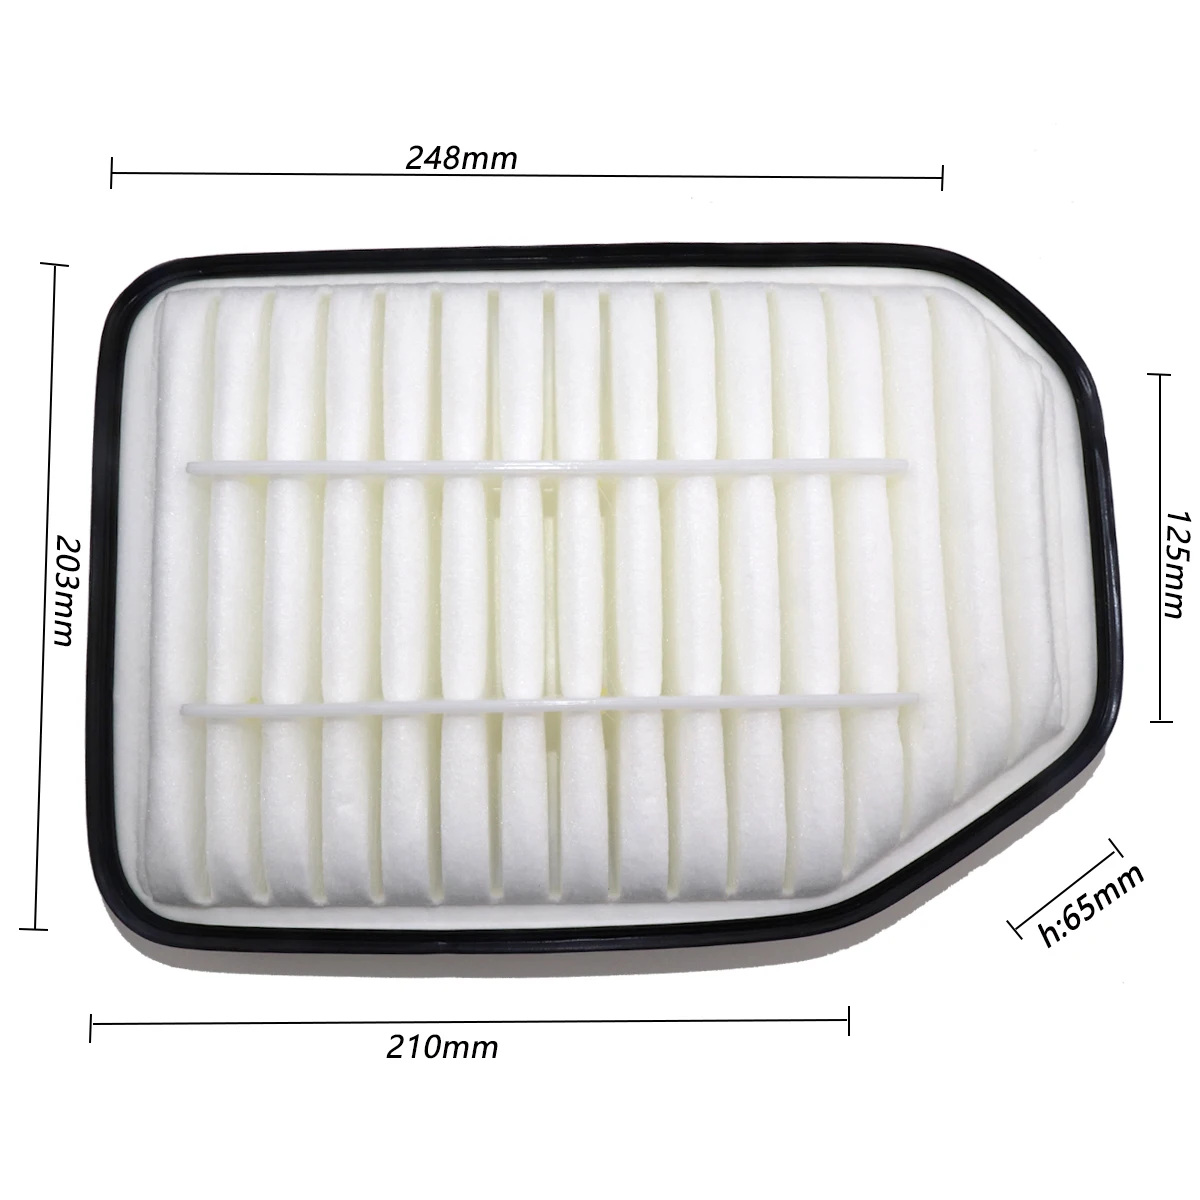 

Engine Air Filter For Jeep WRANGLER III (JK) 2007 2008 2009 2010 2011 2012 2013 2014 2015 2016 2017 2018 2.8TDI 53034019AD